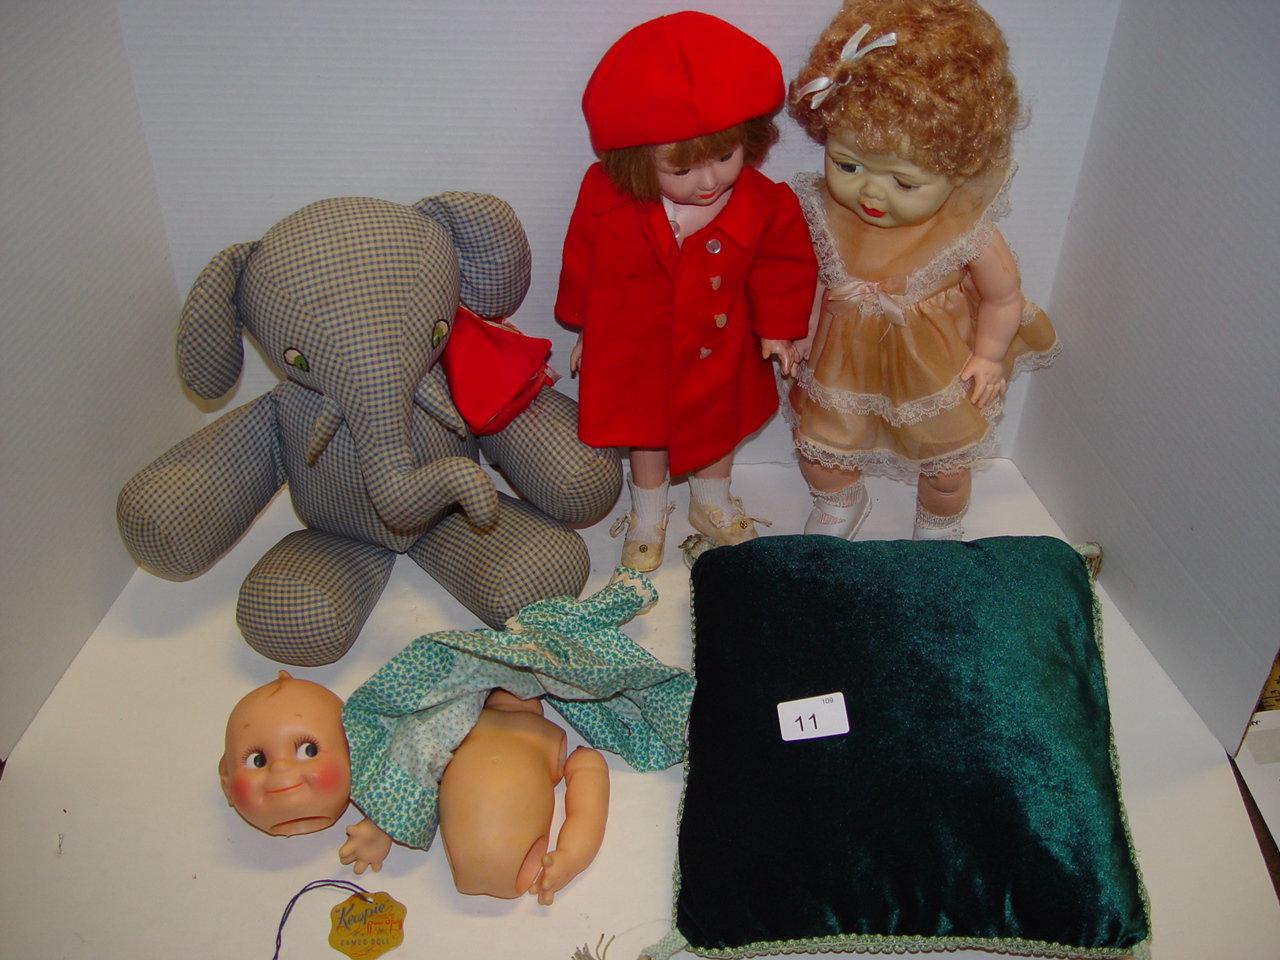 Mixed lot composite sleepy eyed doll, stuffed elephant, Kewpie doll parts and other tallest 15”